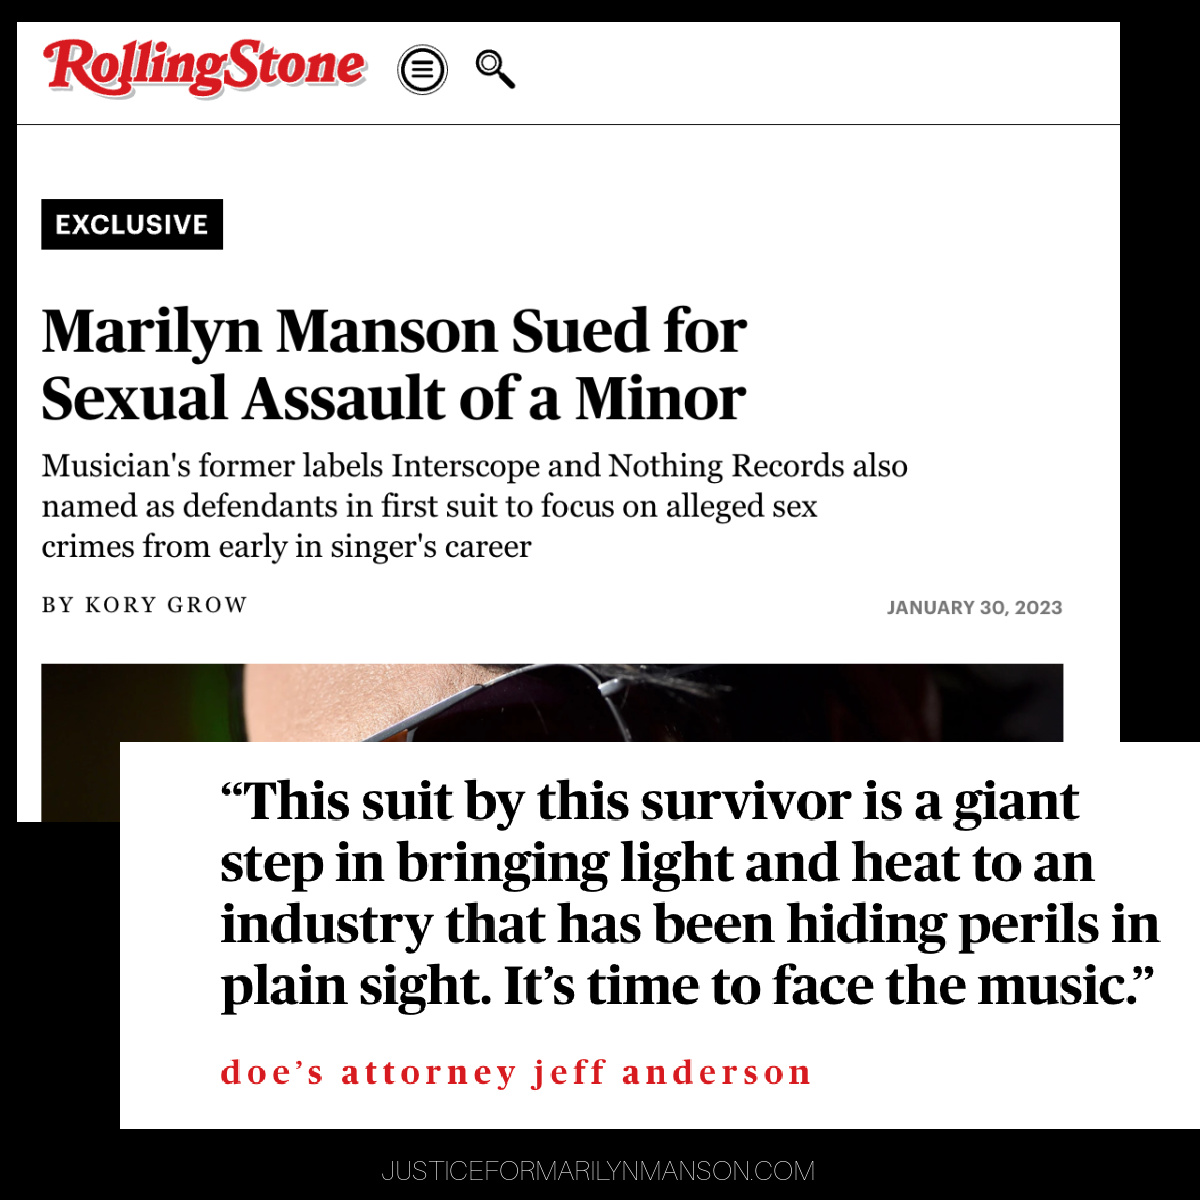 Justice for Marilyn Manson I Rolling Stones January 2023 article